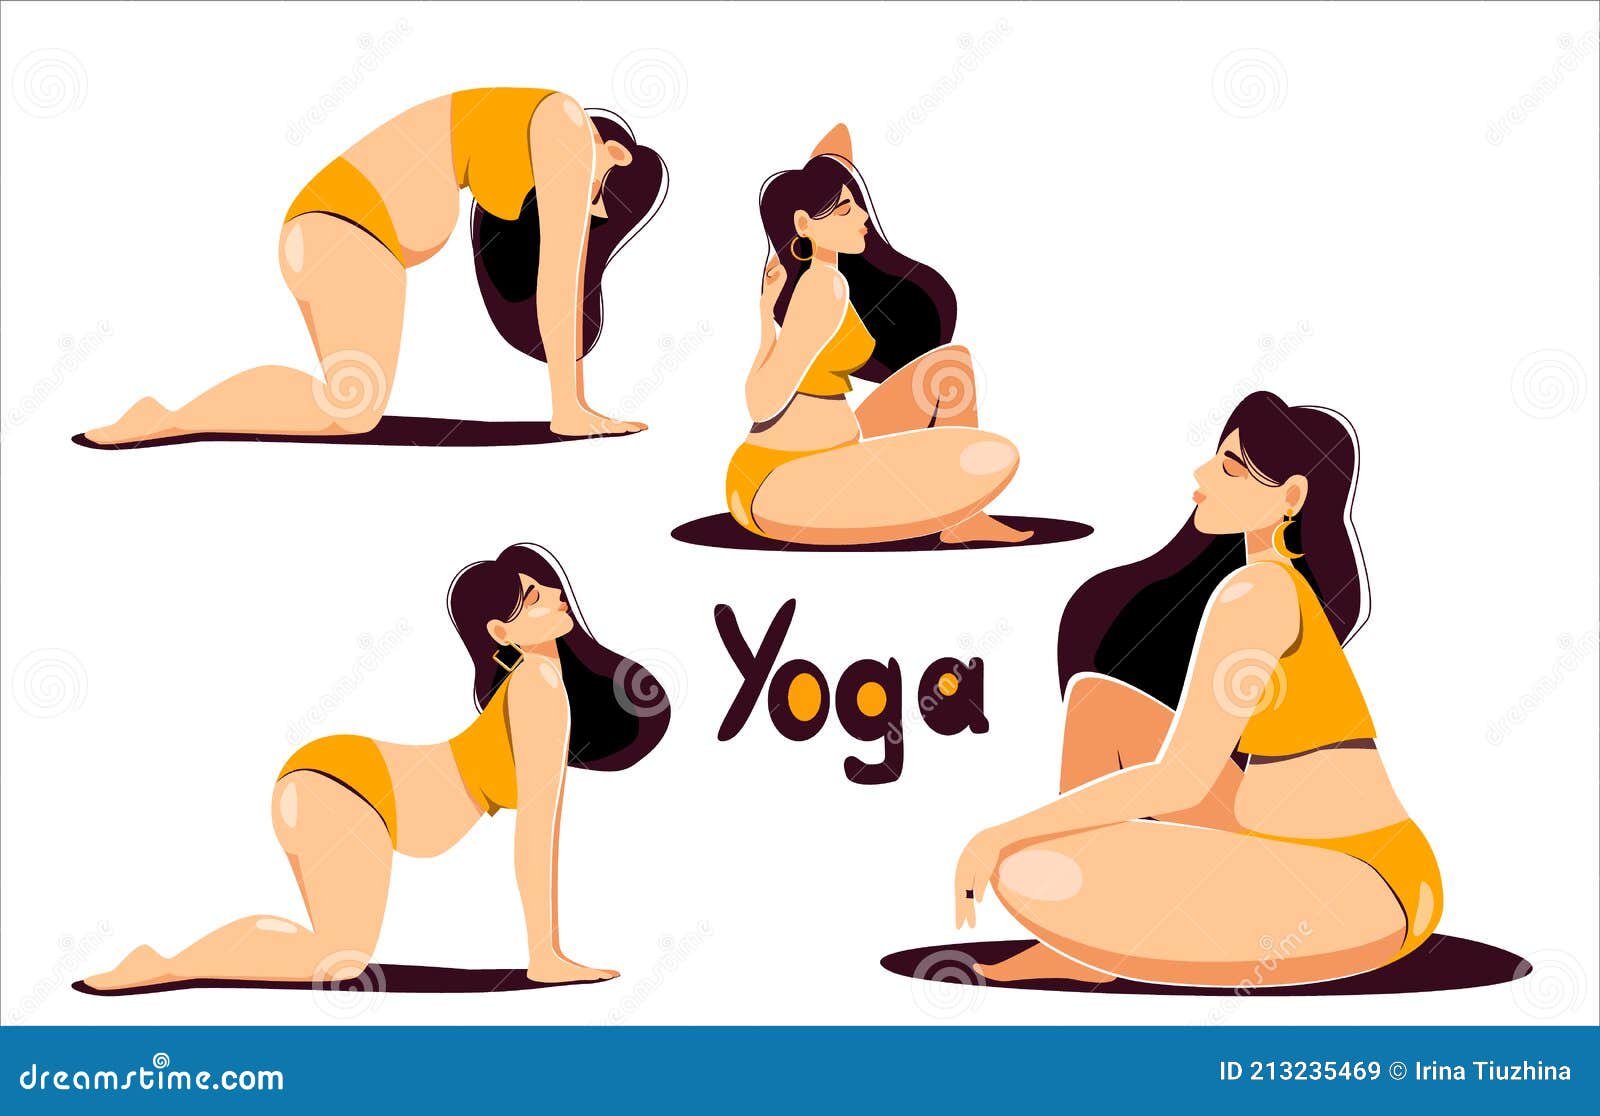 https://thumbs.dreamstime.com/z/set-yoga-poses-attractive-young-plus-size-woman-long-dark-hair-yellow-sports-underwear-cat-cow-face-pose-concept-213235469.jpg